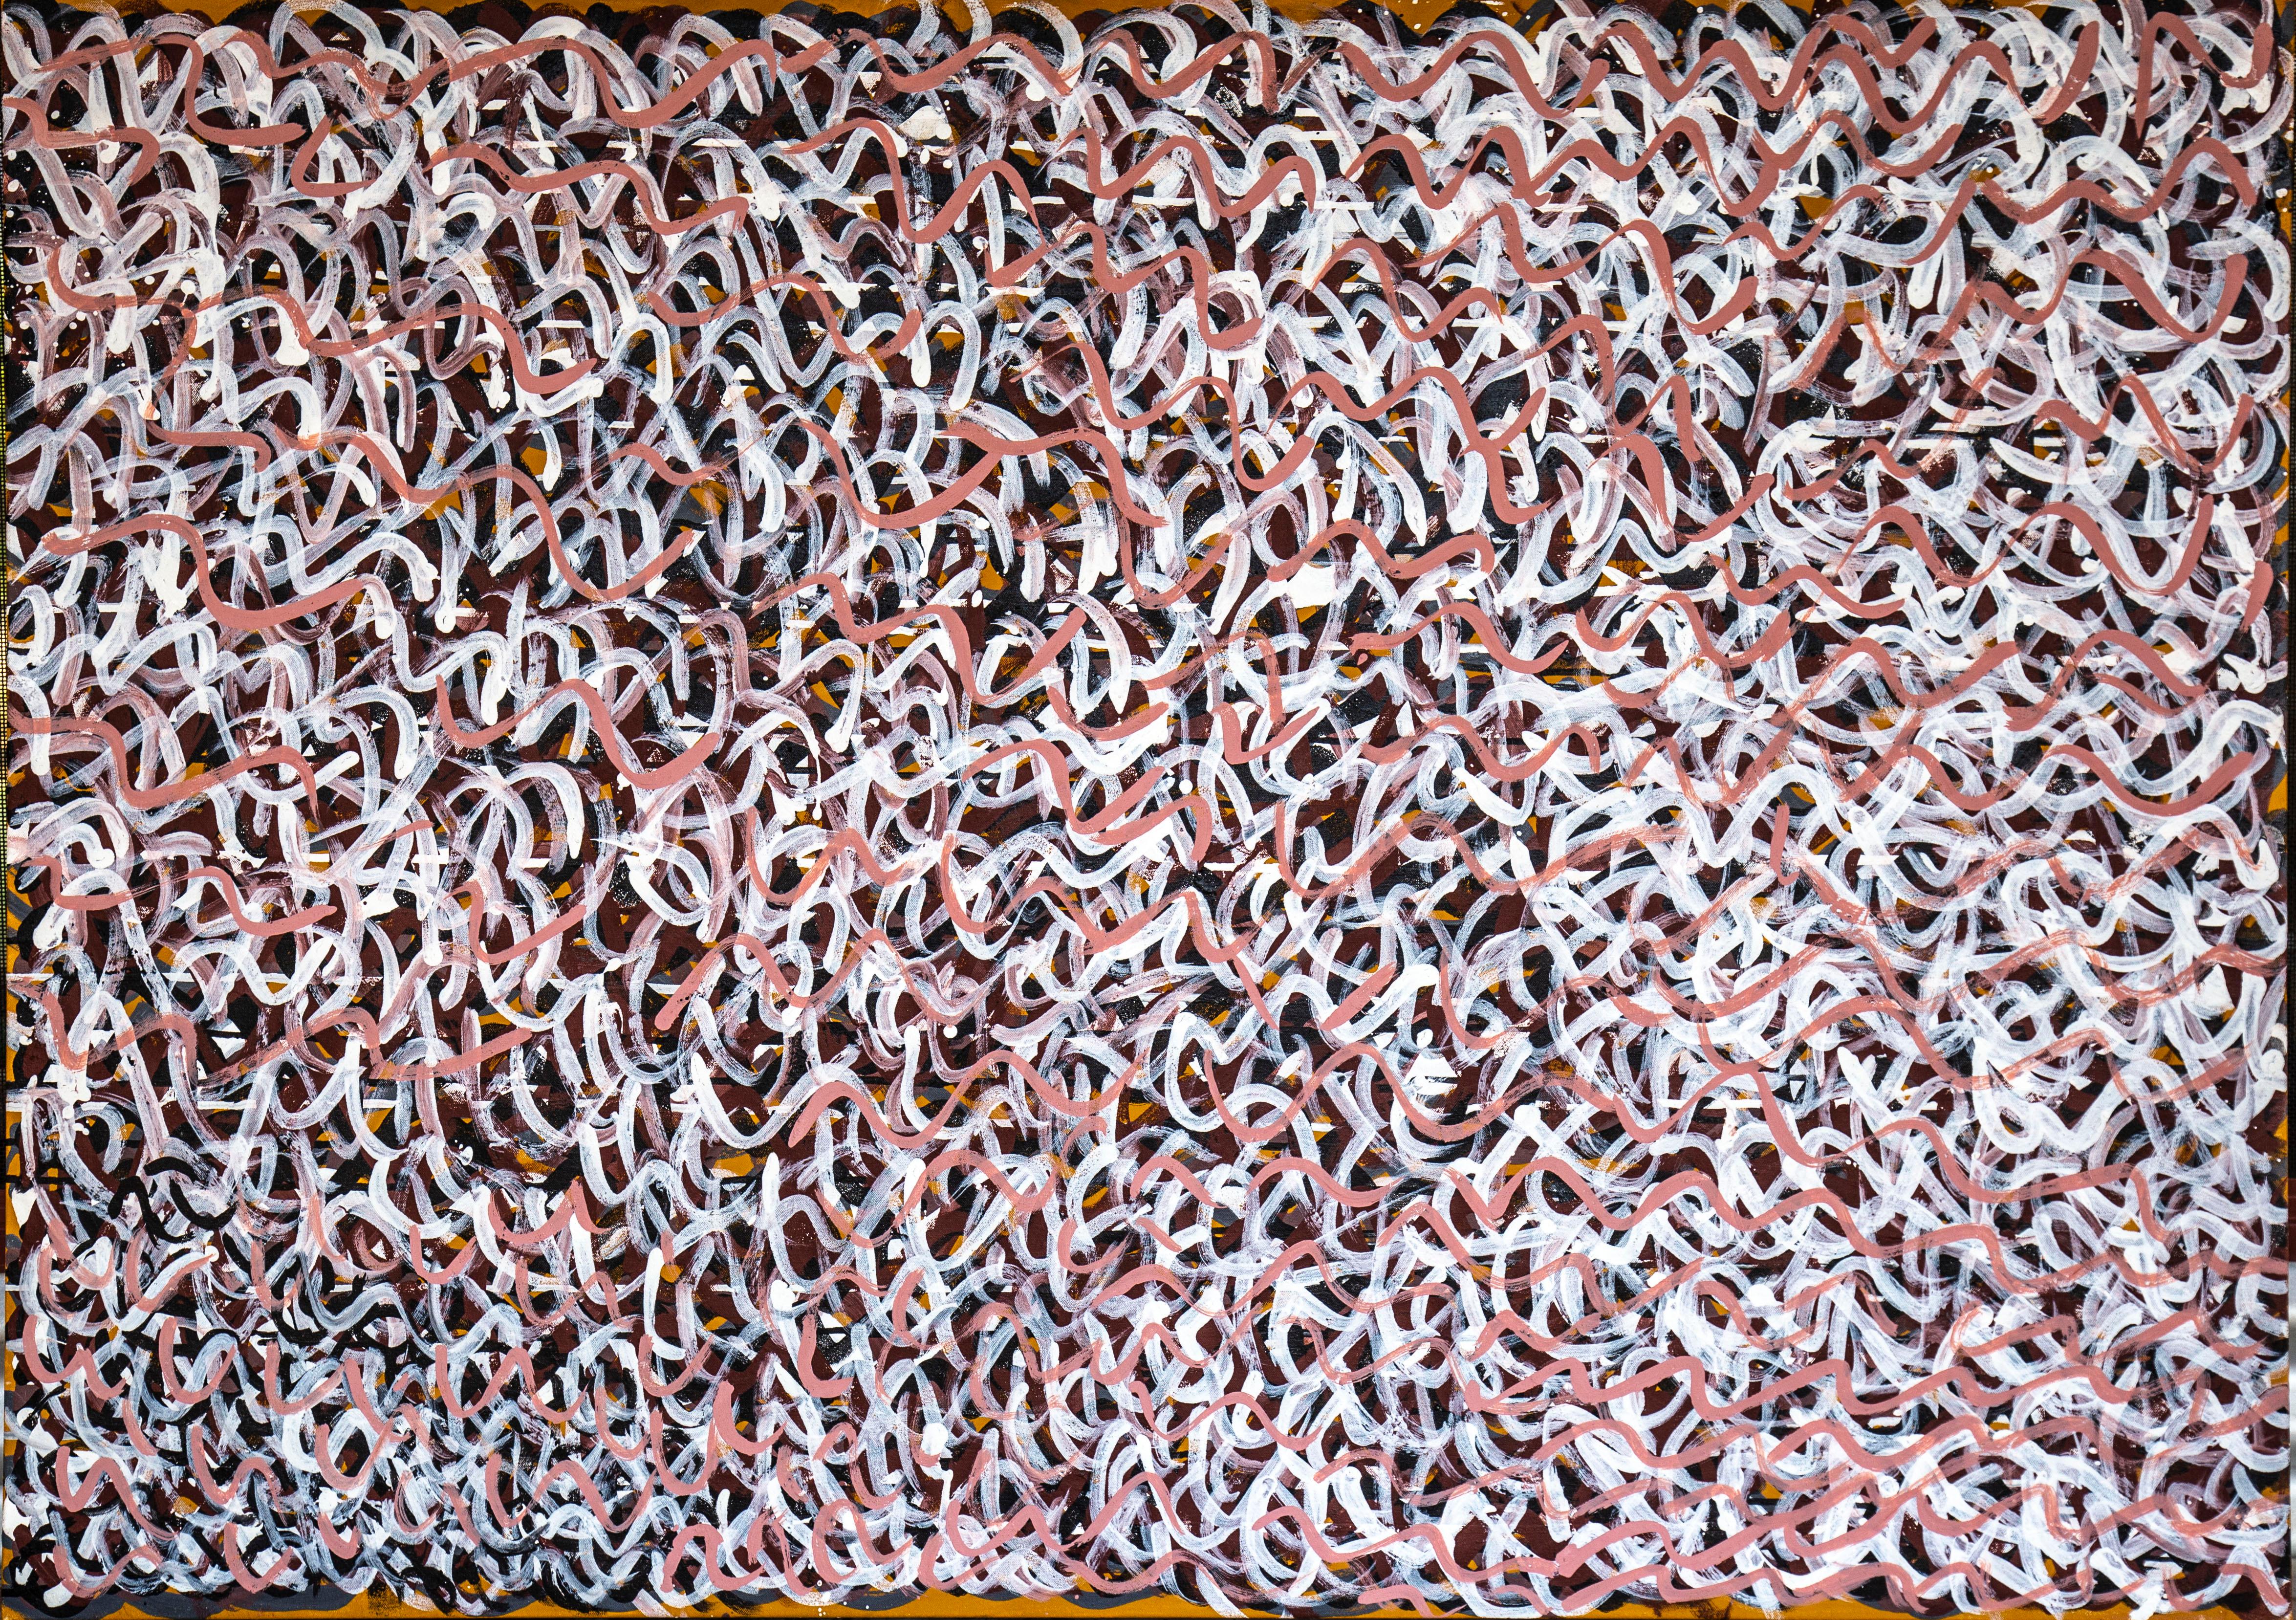 Kittey Malarvie Abstract Painting - Milkwater. Abstract Aboriginal painting about water in ocher and pigments